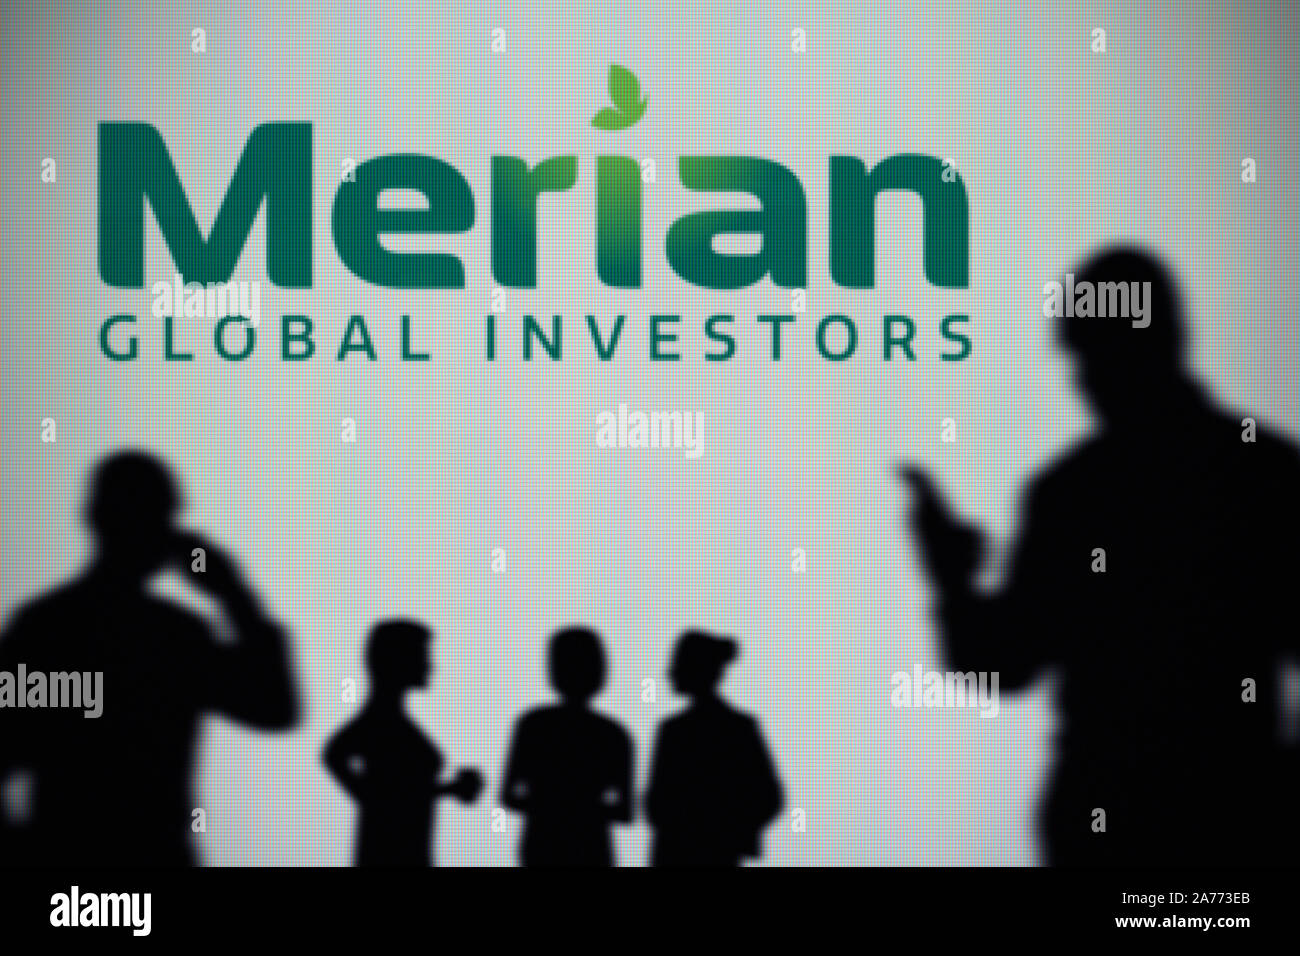 The Merian Global Investors logo is seen on an LED screen in the background while a silhouetted person uses a smartphone (Editorial use only) Stock Photo